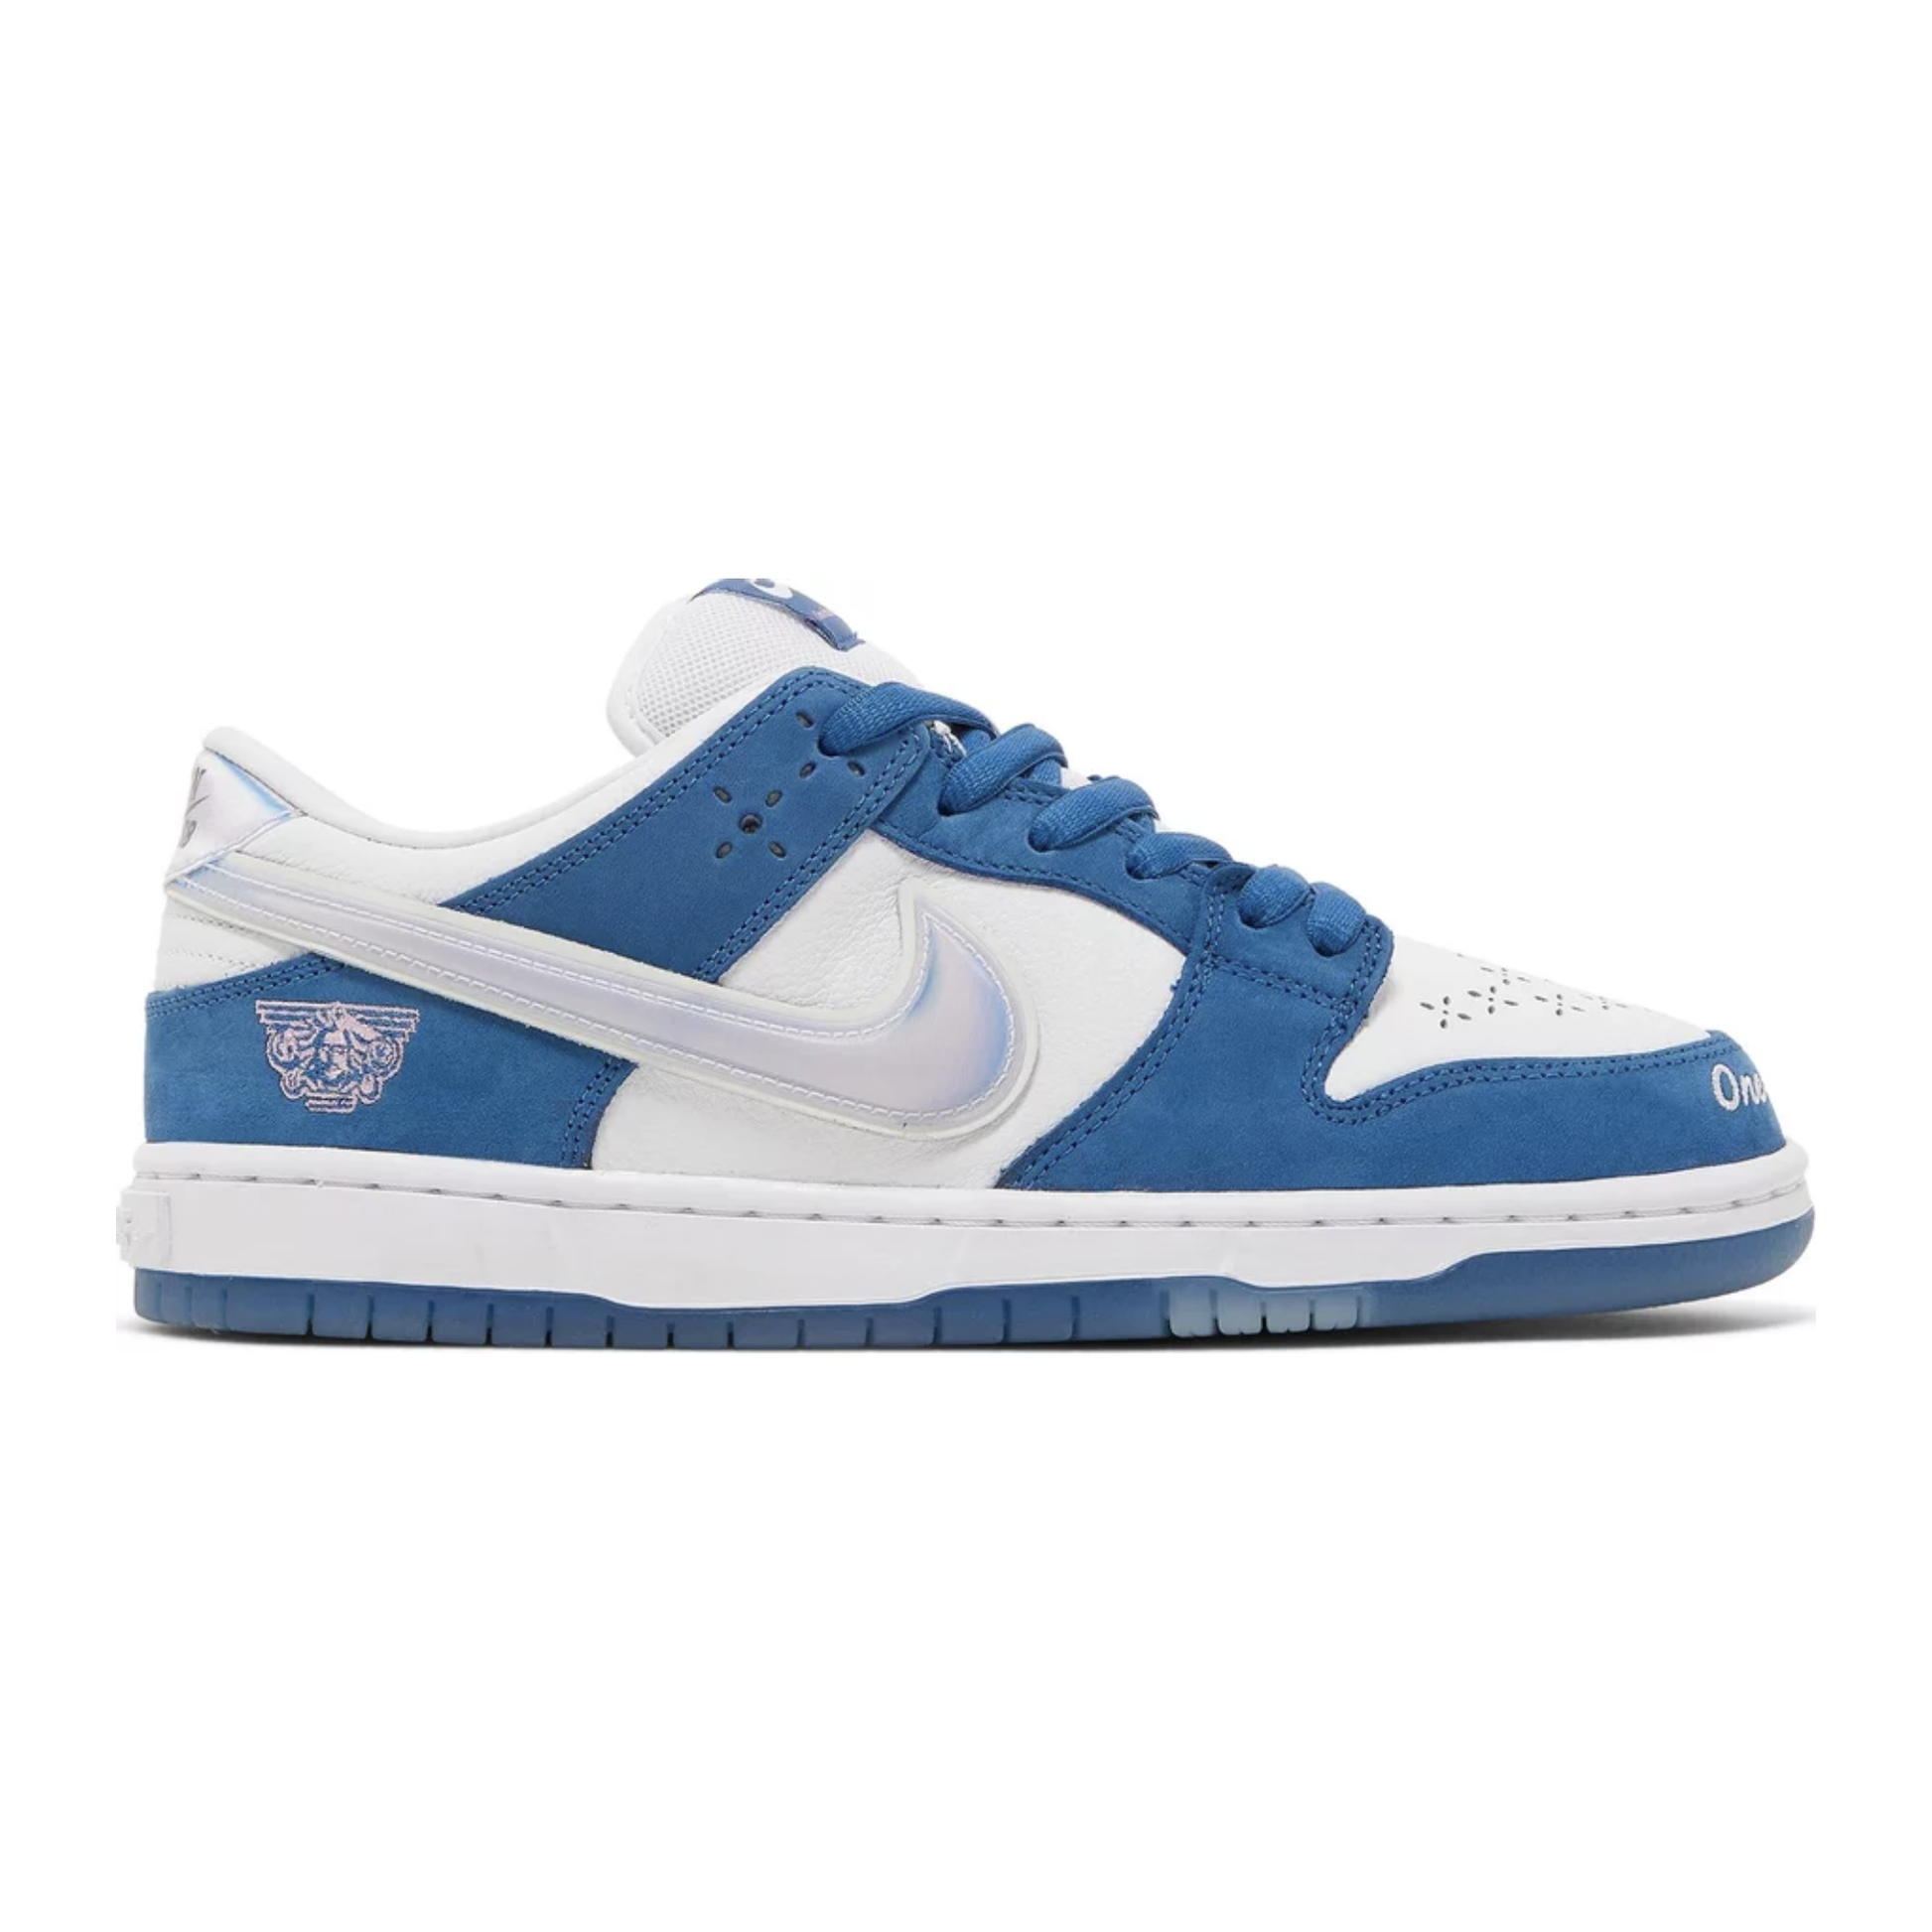 Nike SB Dunk Low Born X Raised by Nike from £347.00